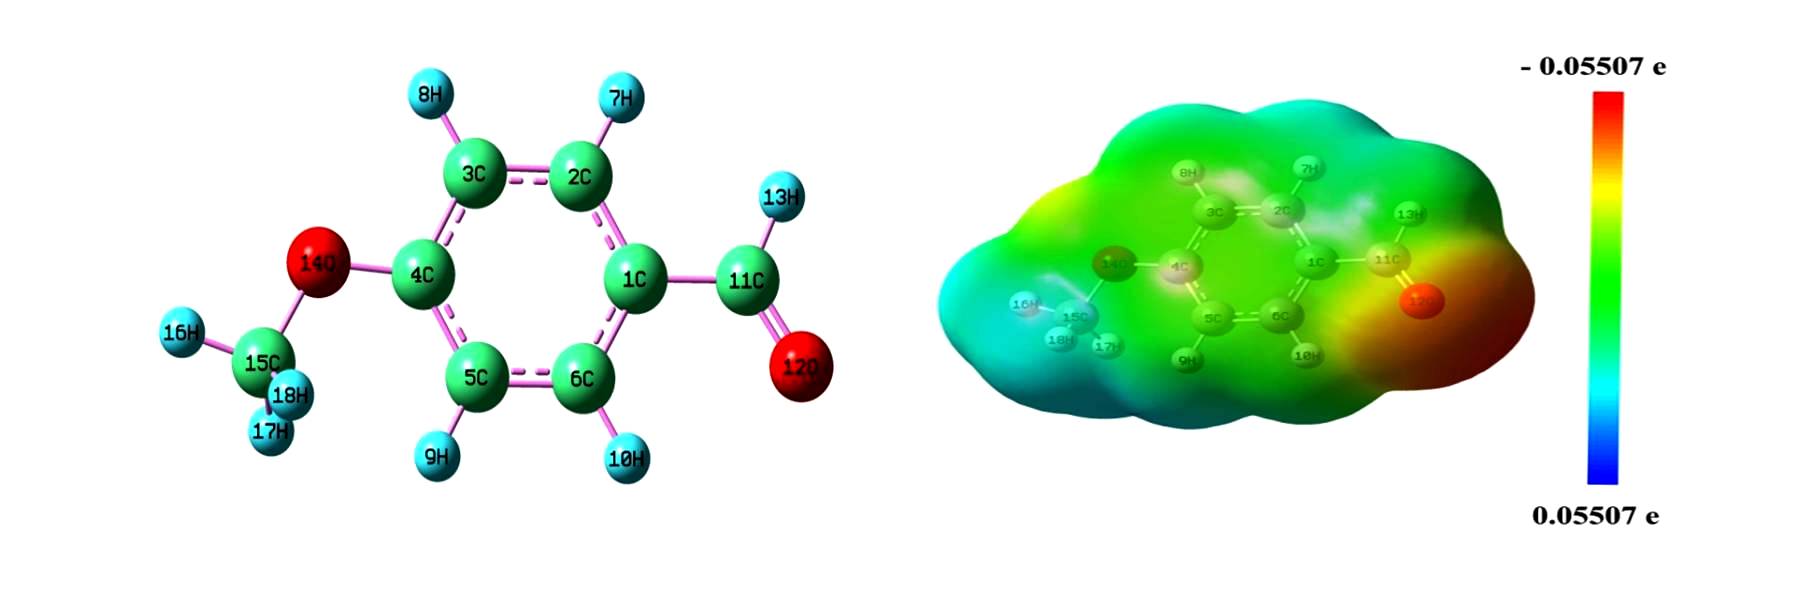 Molecular structure and spectroscopic properties of 4-methoxybenzaldehyde based on density functional theory calculations